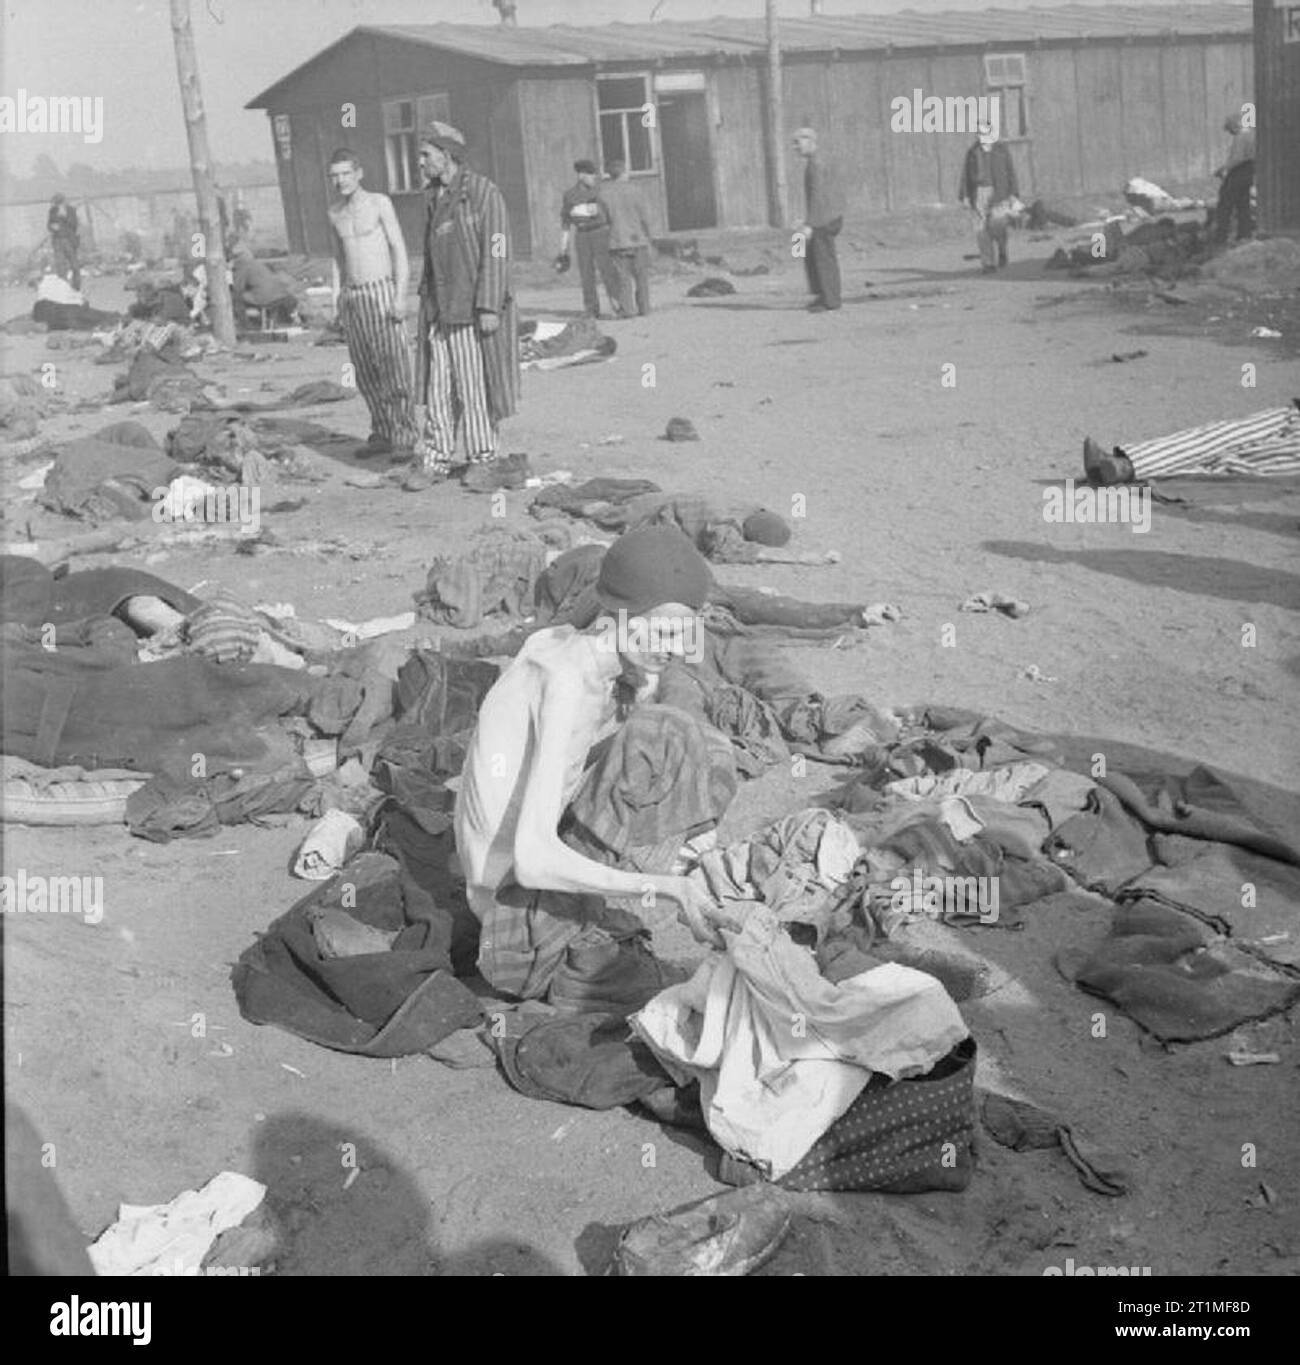 The Liberation of Bergen-belsen Concentration Camp, April 1945 A camp inmate, reduced by starvation to a living skeleton, delouses his clothes. Stock Photo